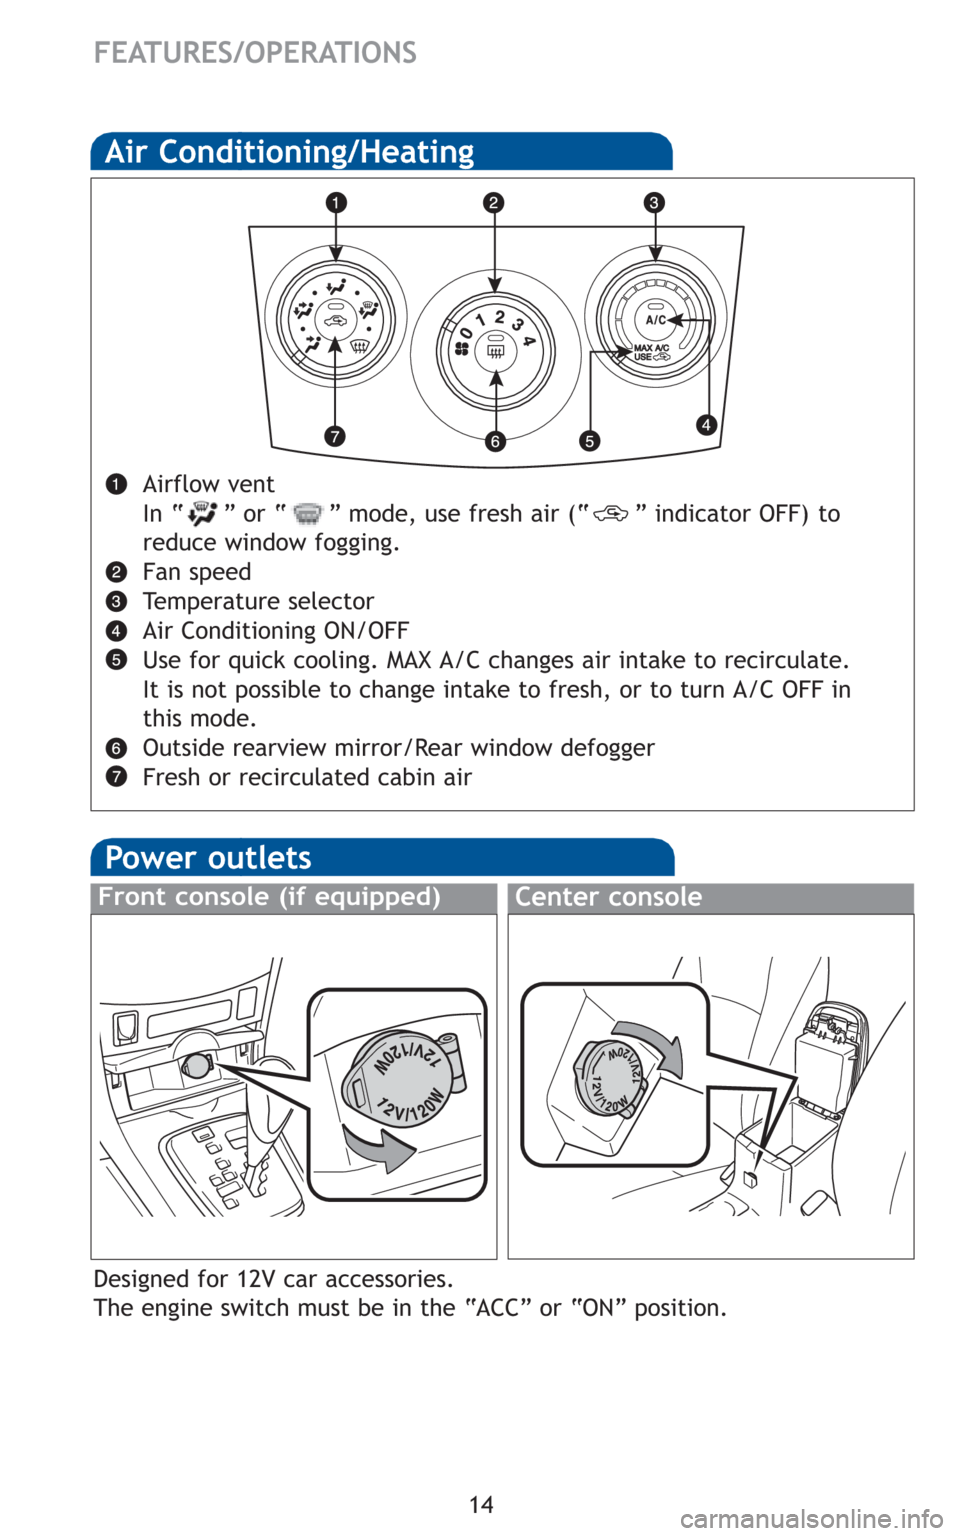 TOYOTA COROLLA 2010 10.G Quick Reference Guide 14
FEATURES/OPERATIONS
Air Conditioning/Heating
Airflow vent
In “ ” or “ ” mode, use fresh air (“ ” indicator OFF) to
reduce window fogging.
Fan speed
Temperature selector
Air Conditioning